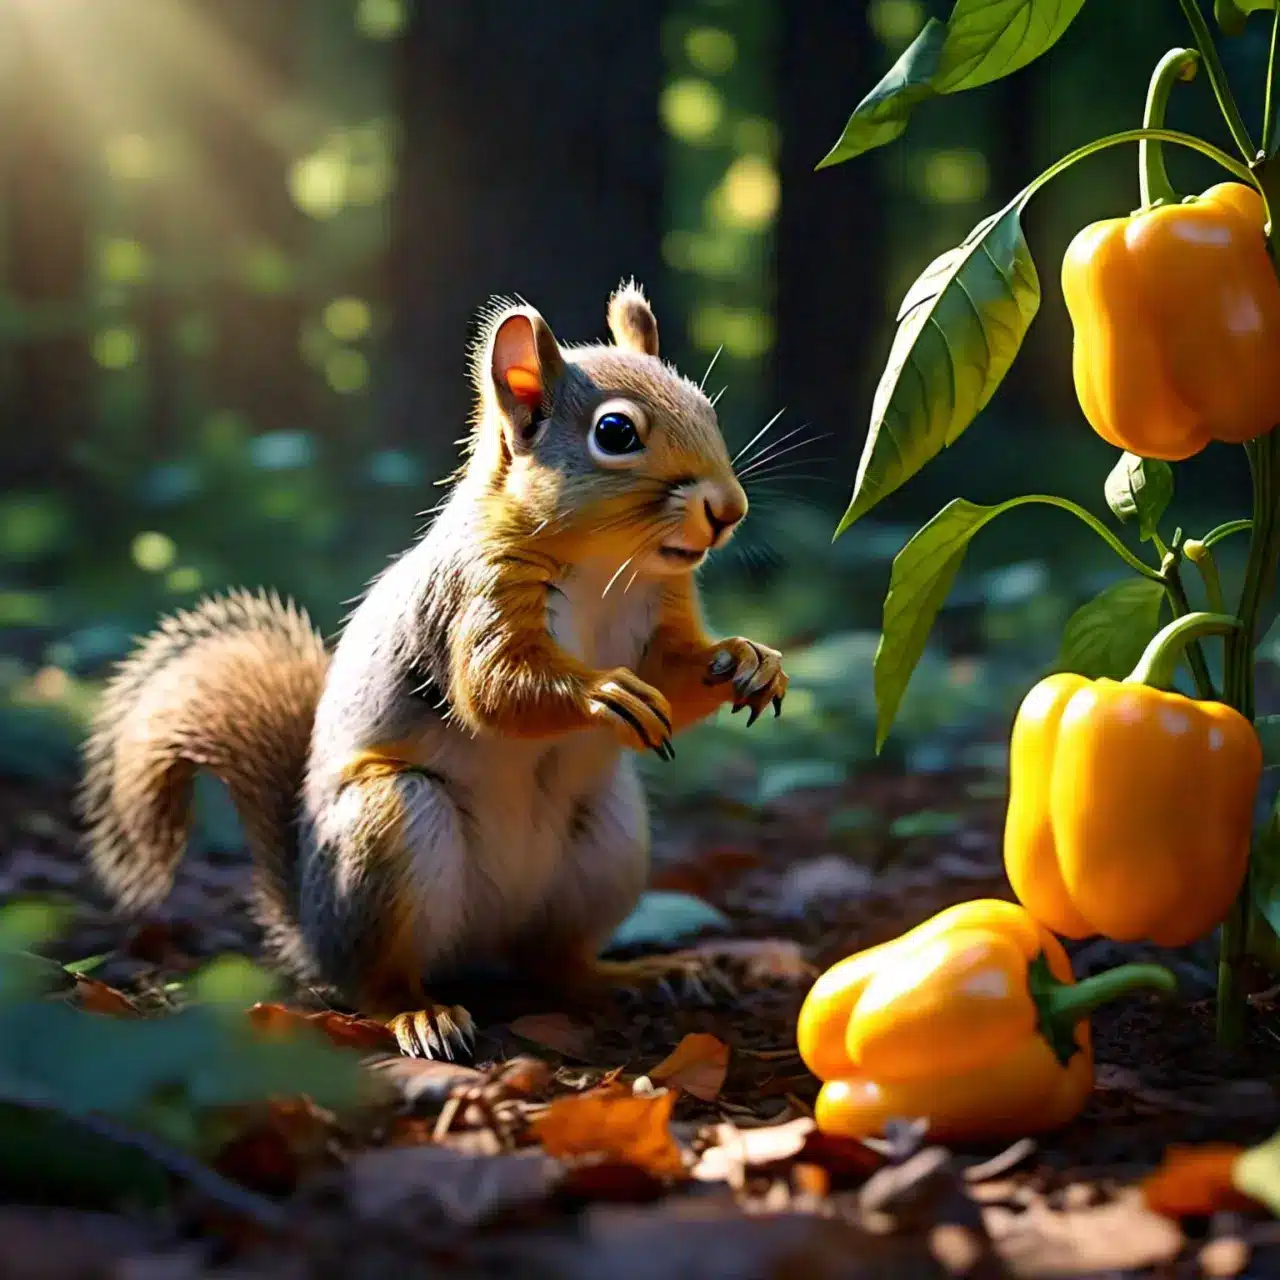 The squirrel is reaching for a ripe yellow bell pepper